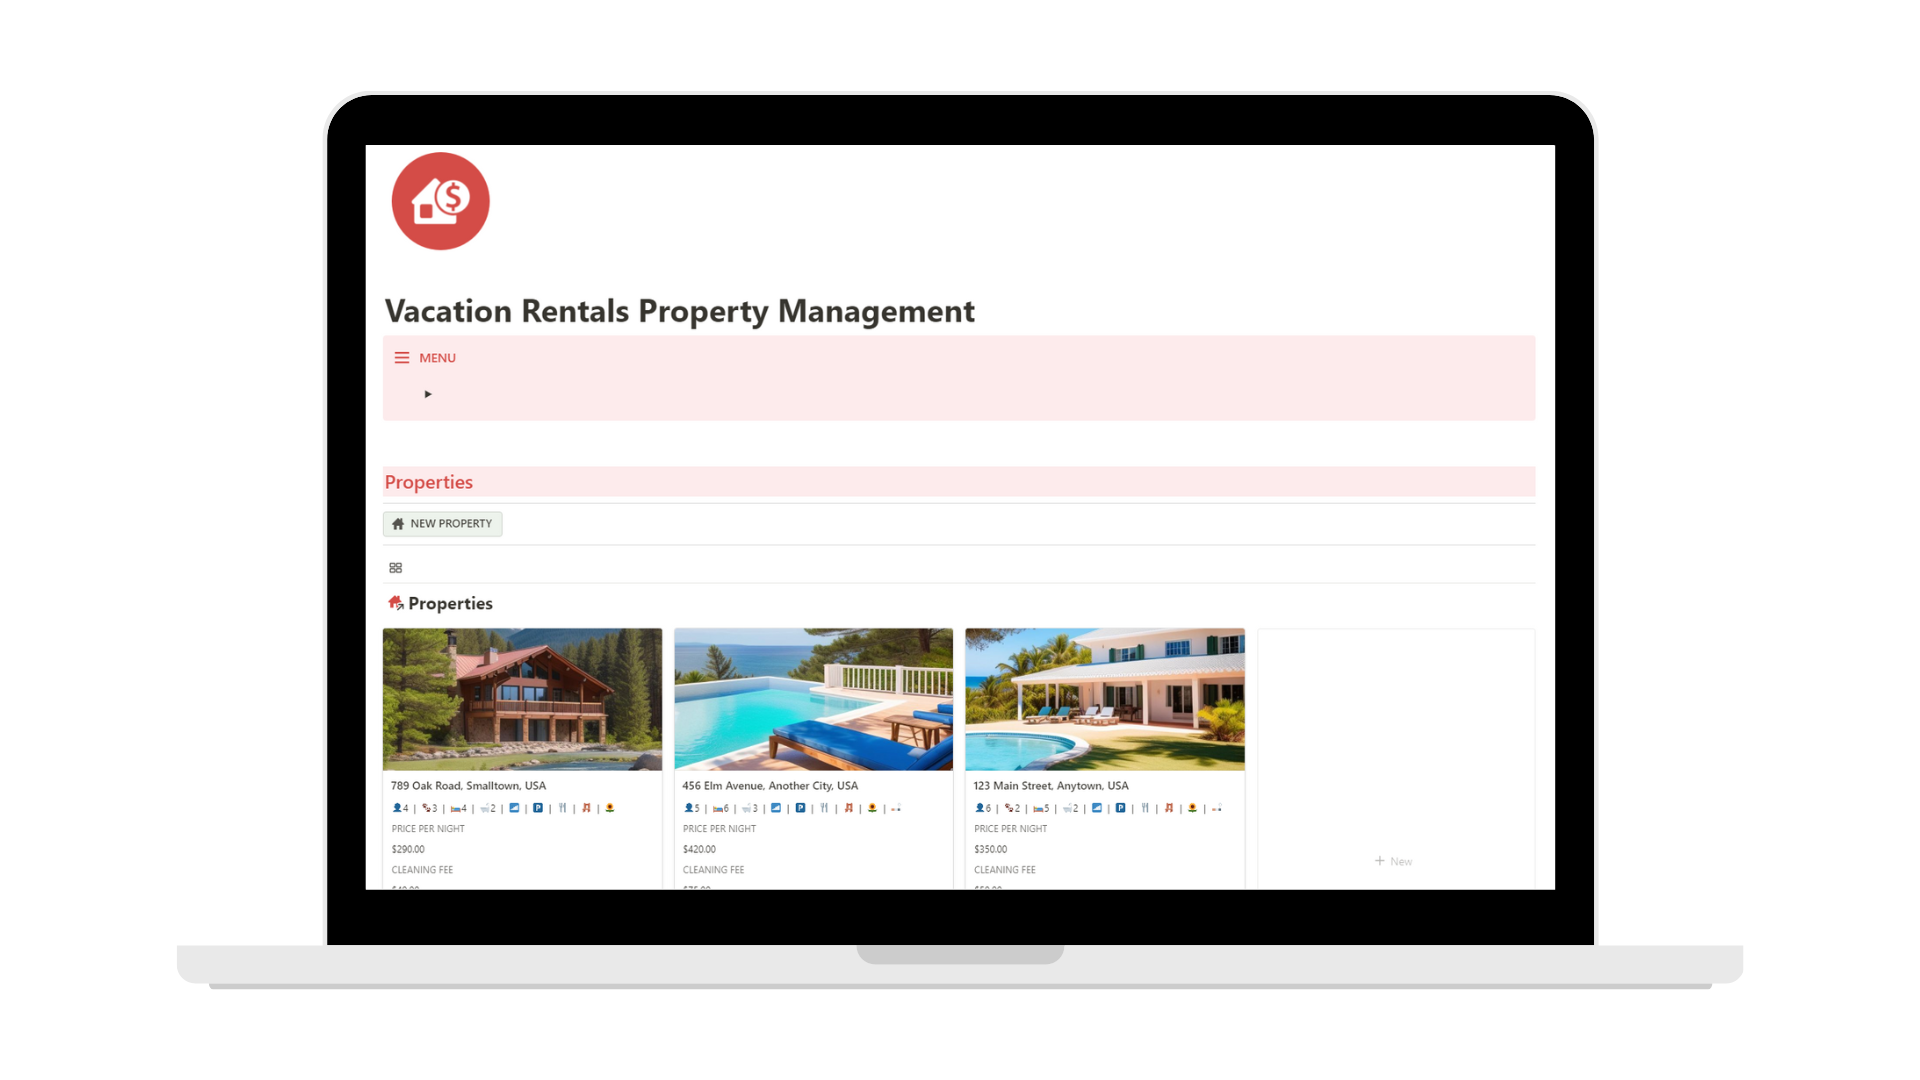 Vacation Rentals Property Management (Notion template)